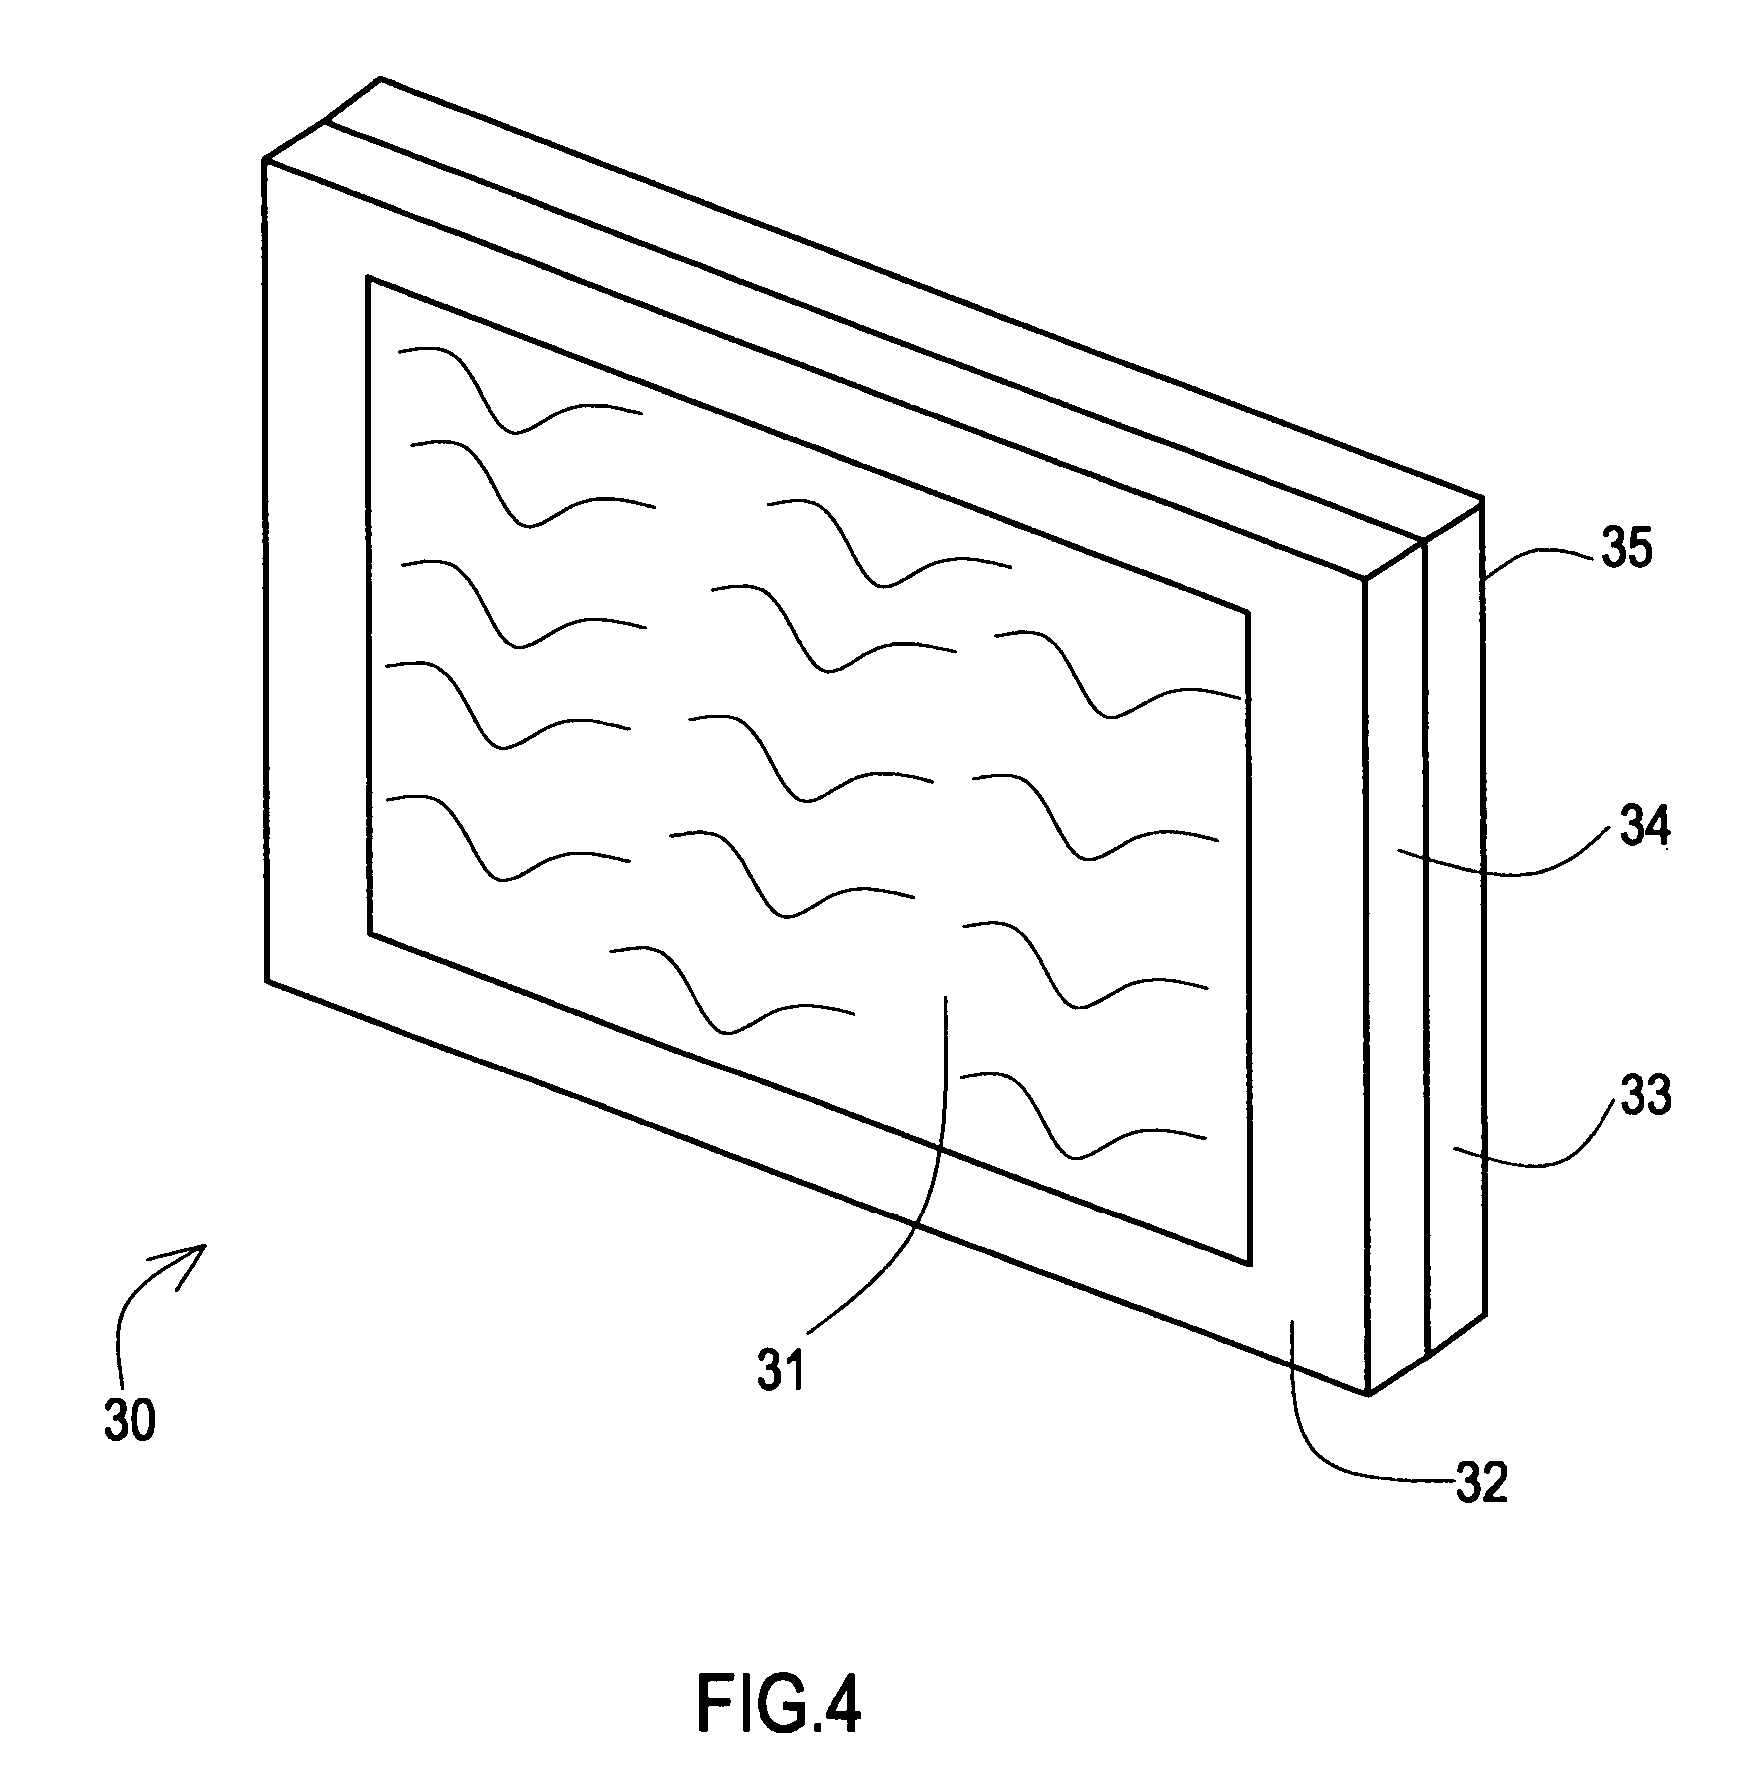 Anti-microbial compositions and methods of making and using the same